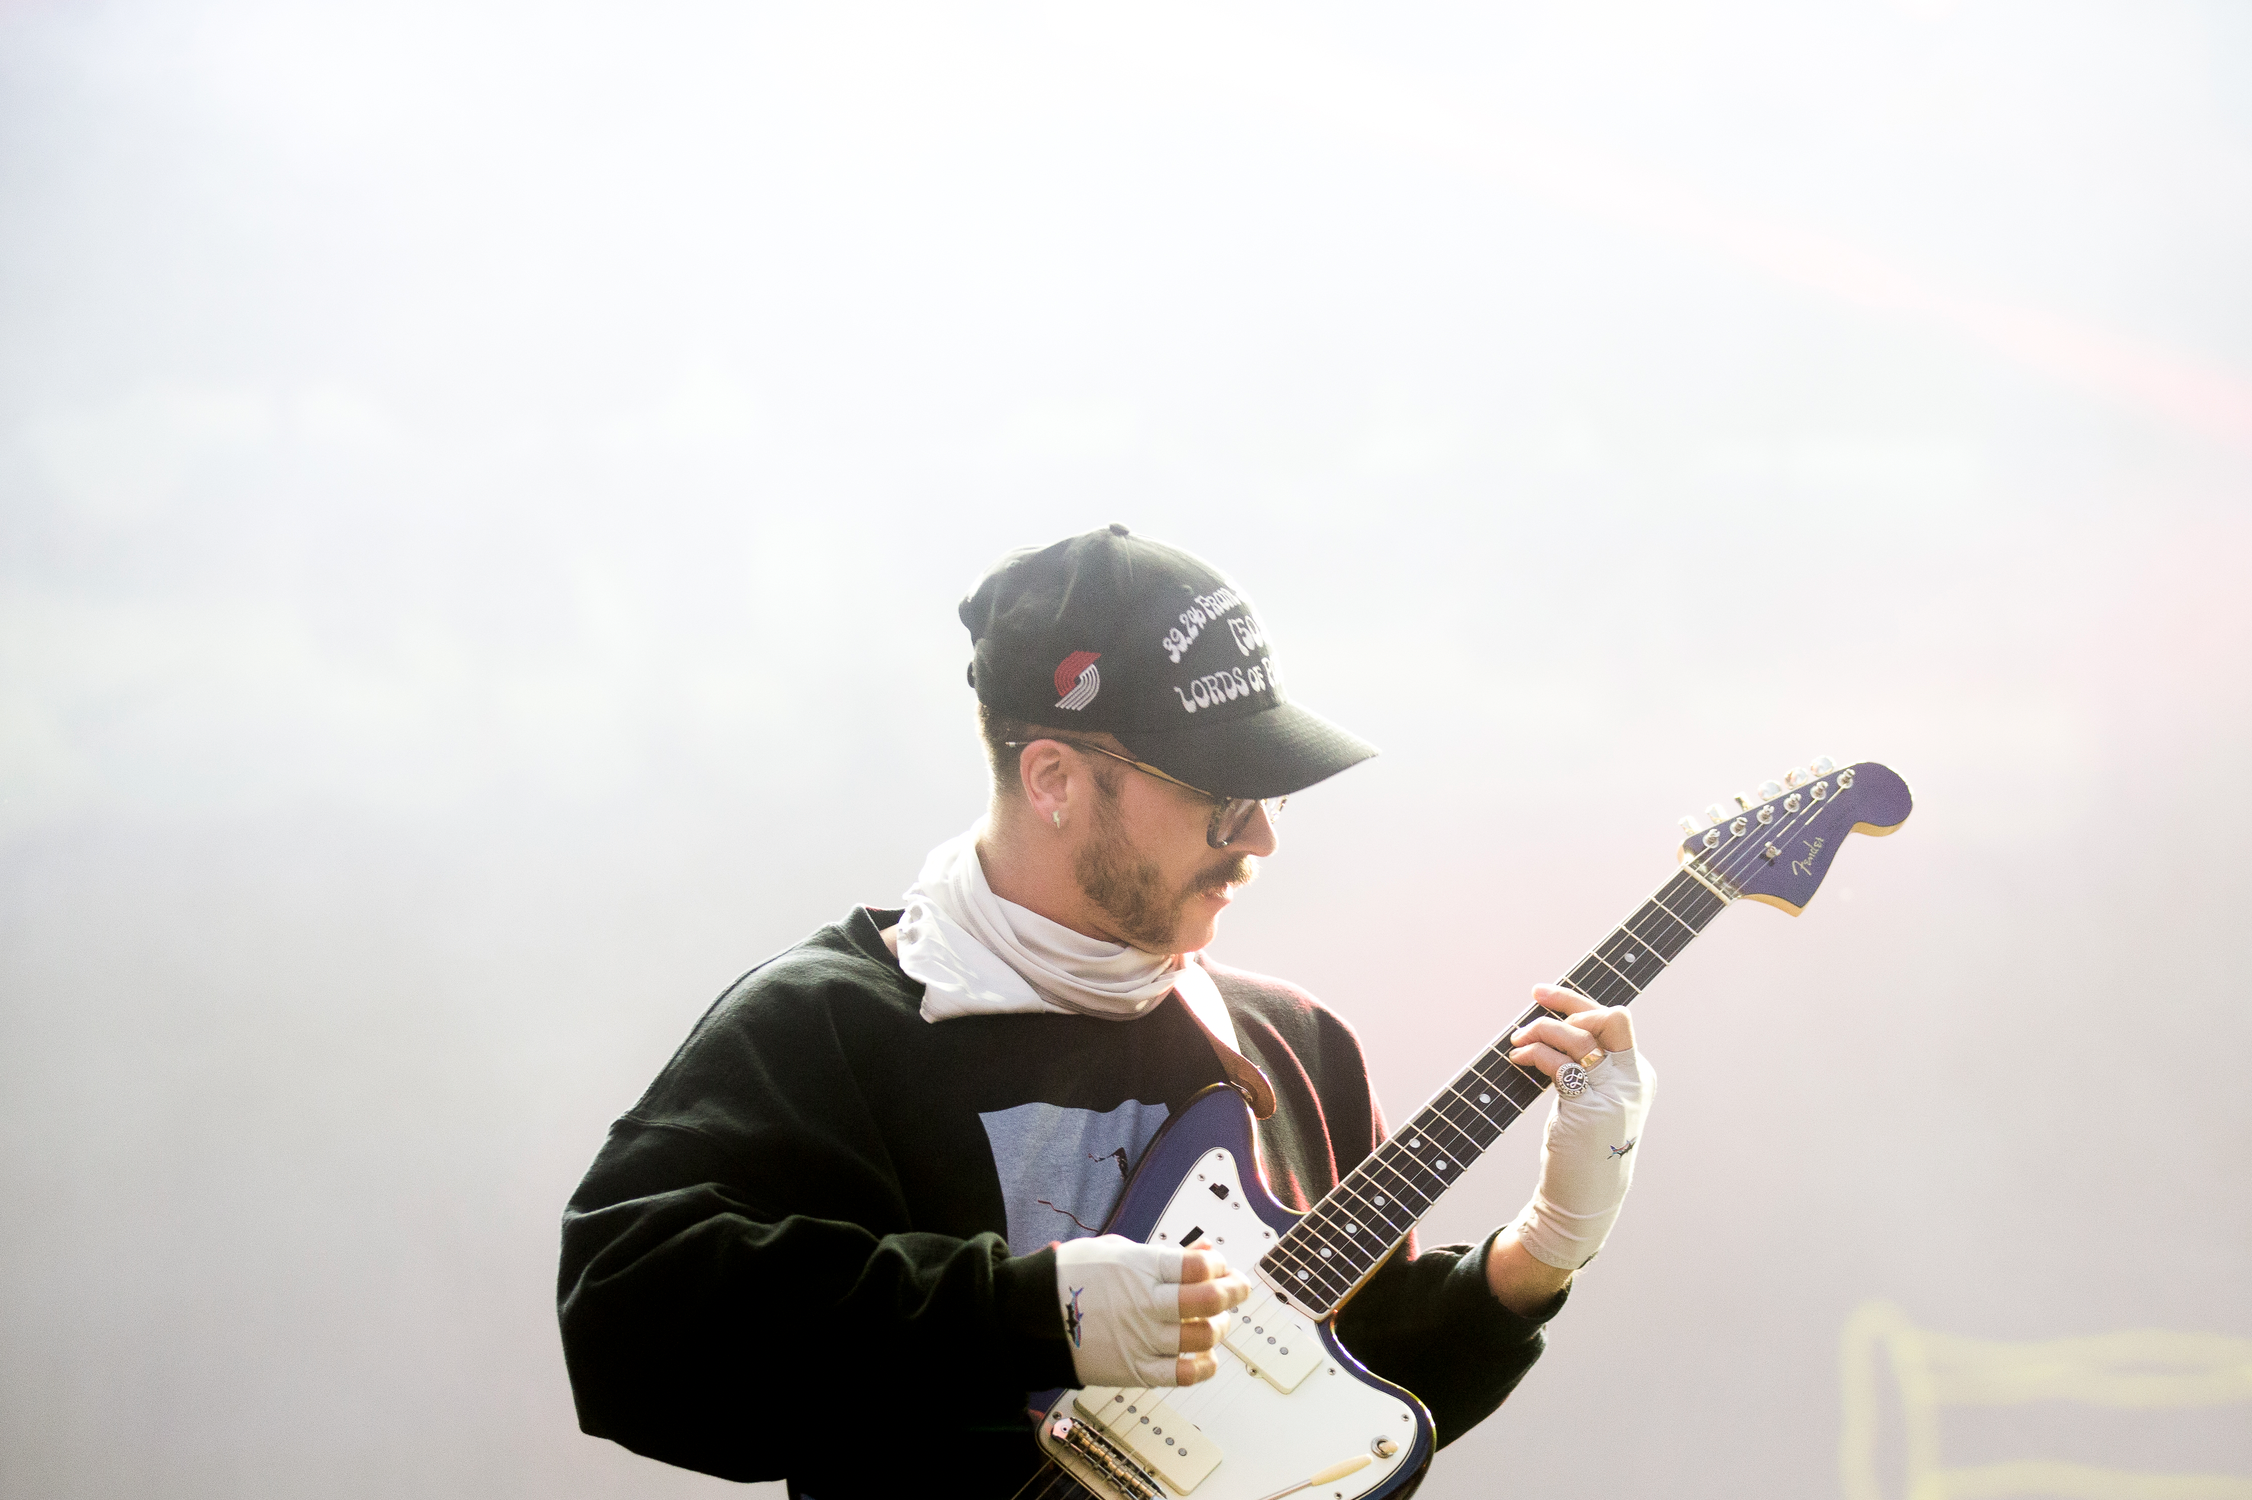  Portugal. The Man 